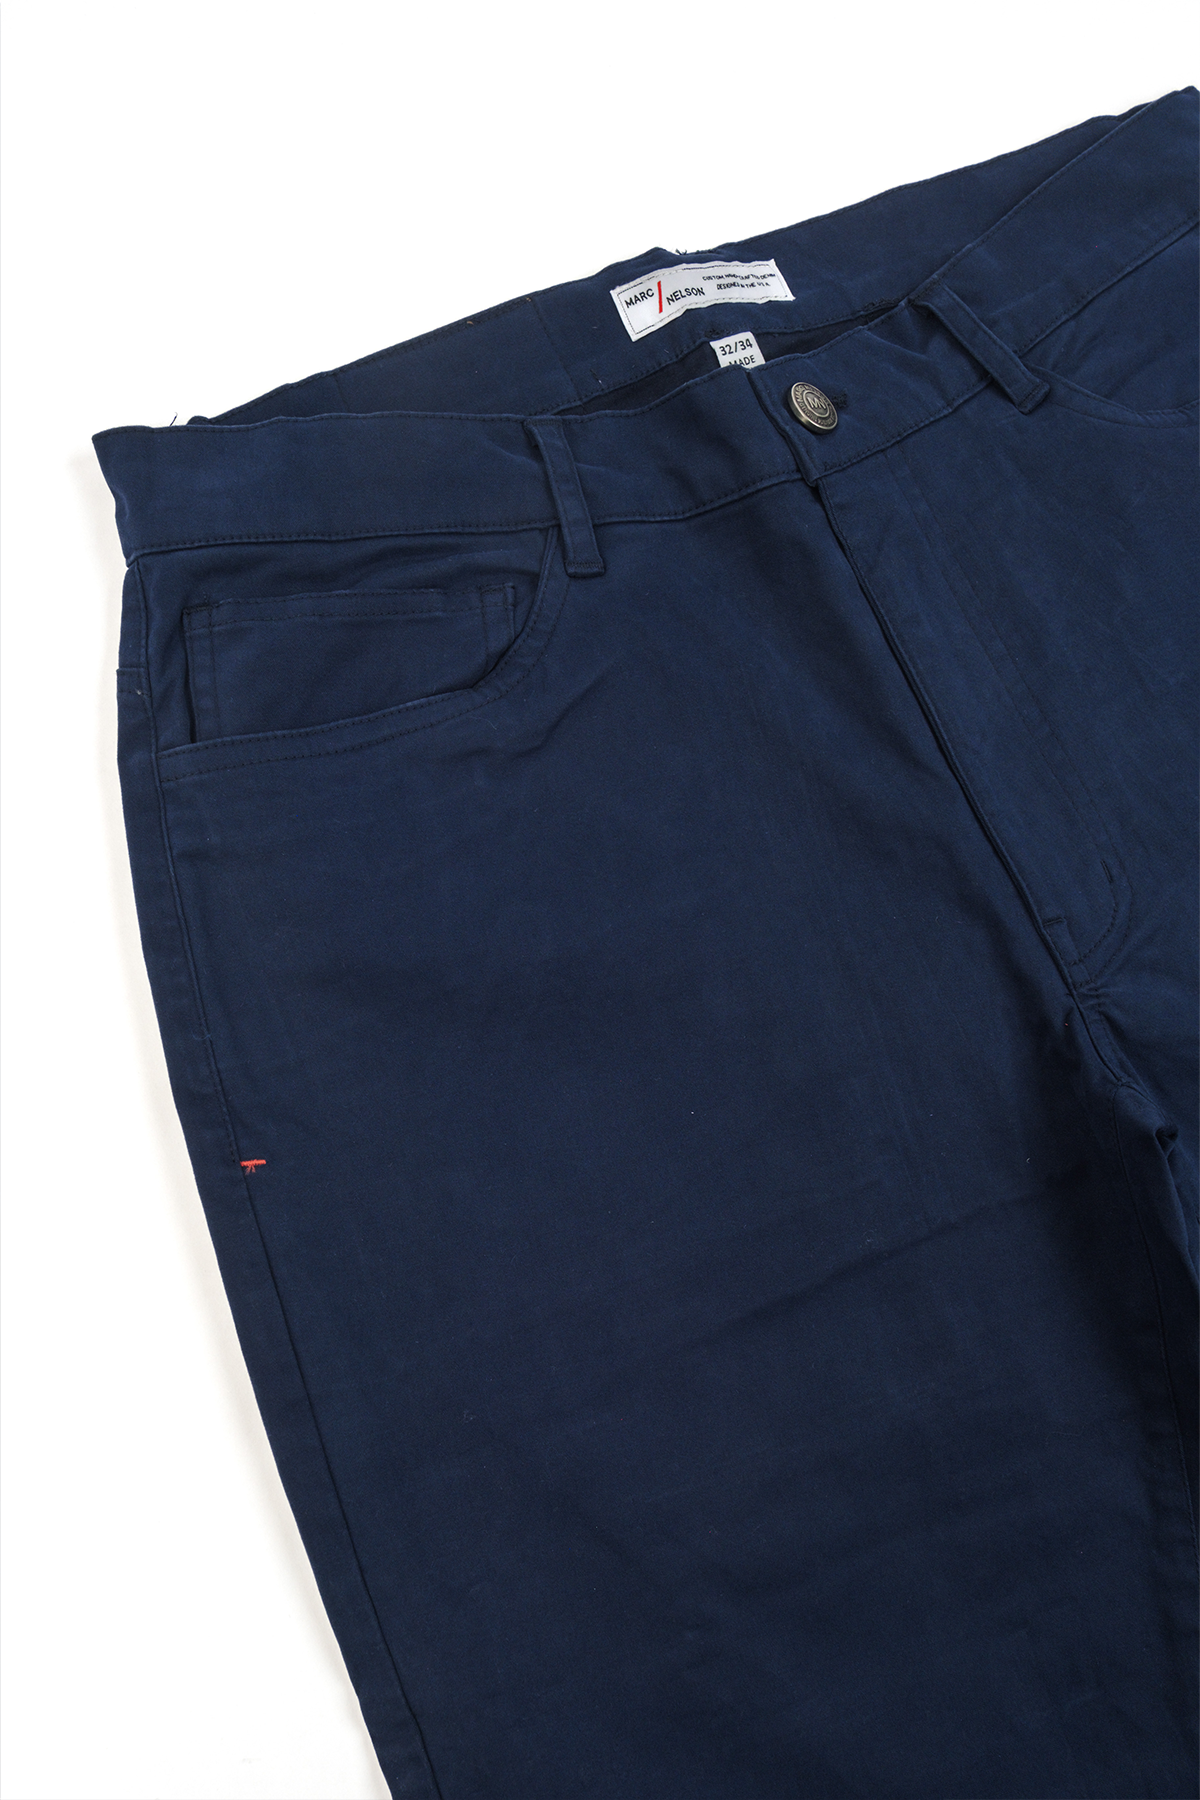 Close up photo of the frontside of the George Navy Pants focusing on the details of the button and the waist tag.